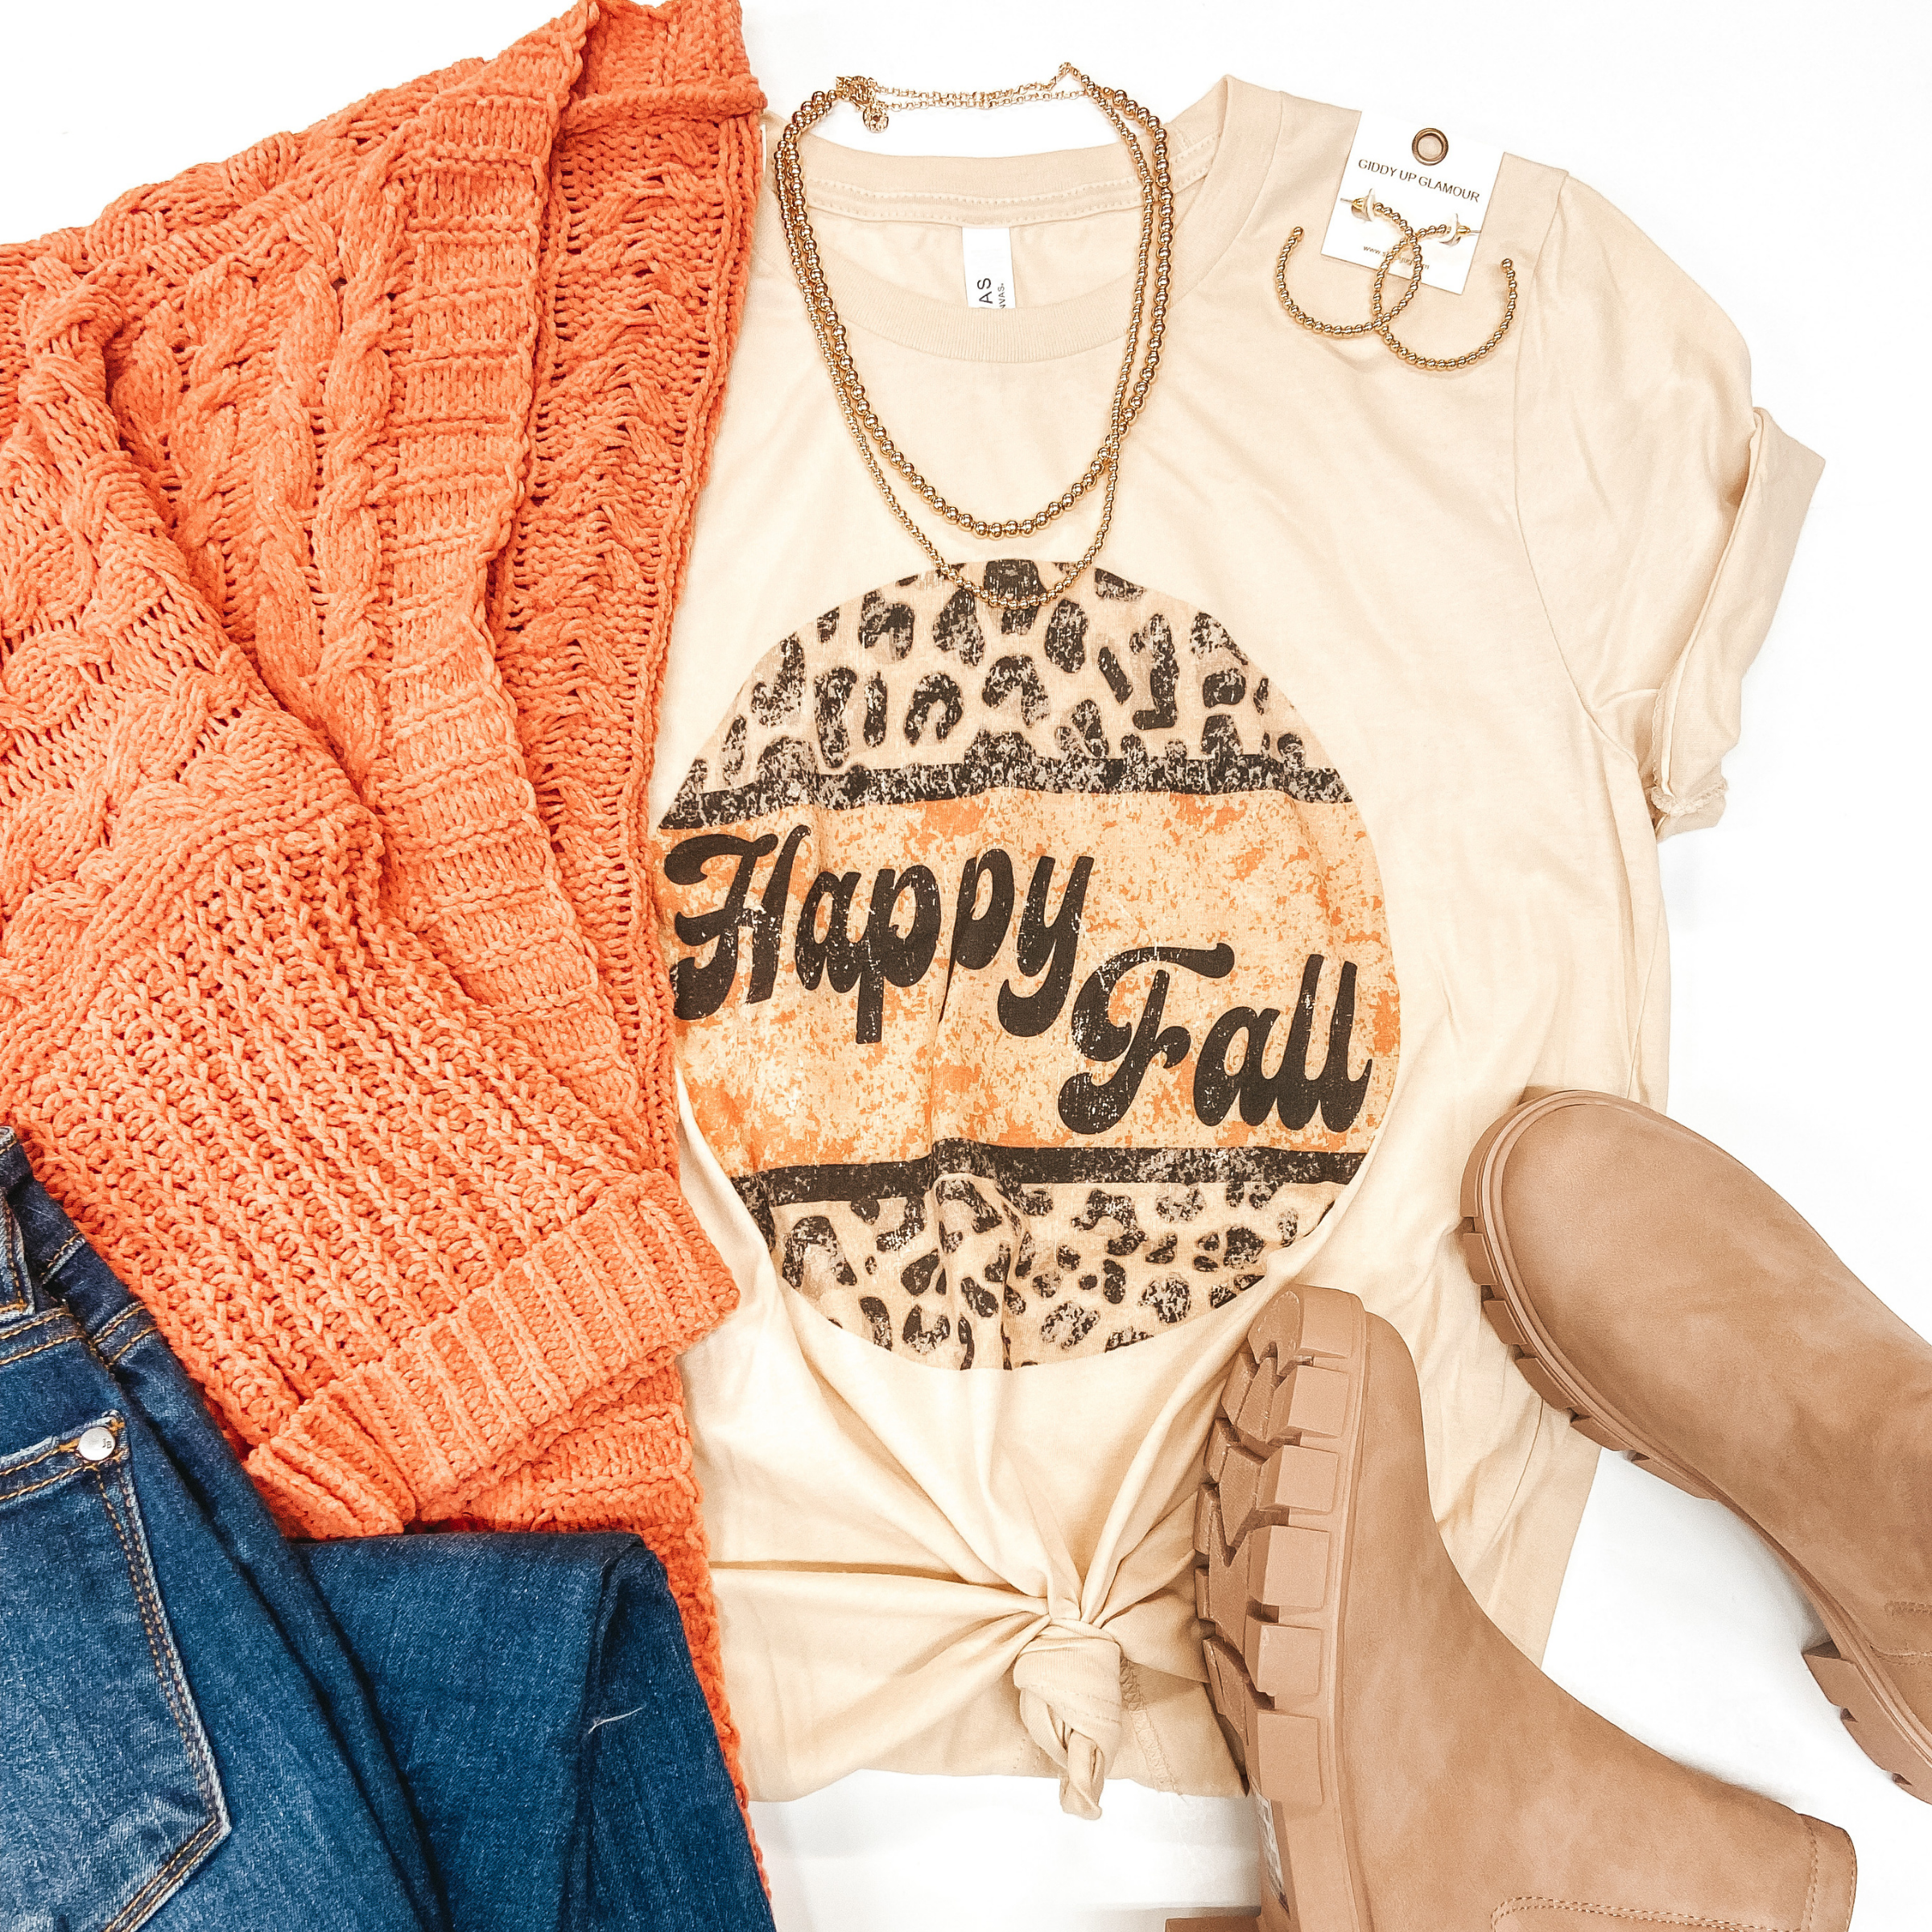 Beige crew neck tee shirt with leopard and orange circle that says "Happy Fall" inside. Pictured with orange cardigan, jeans, booties, and gold jewelry. 